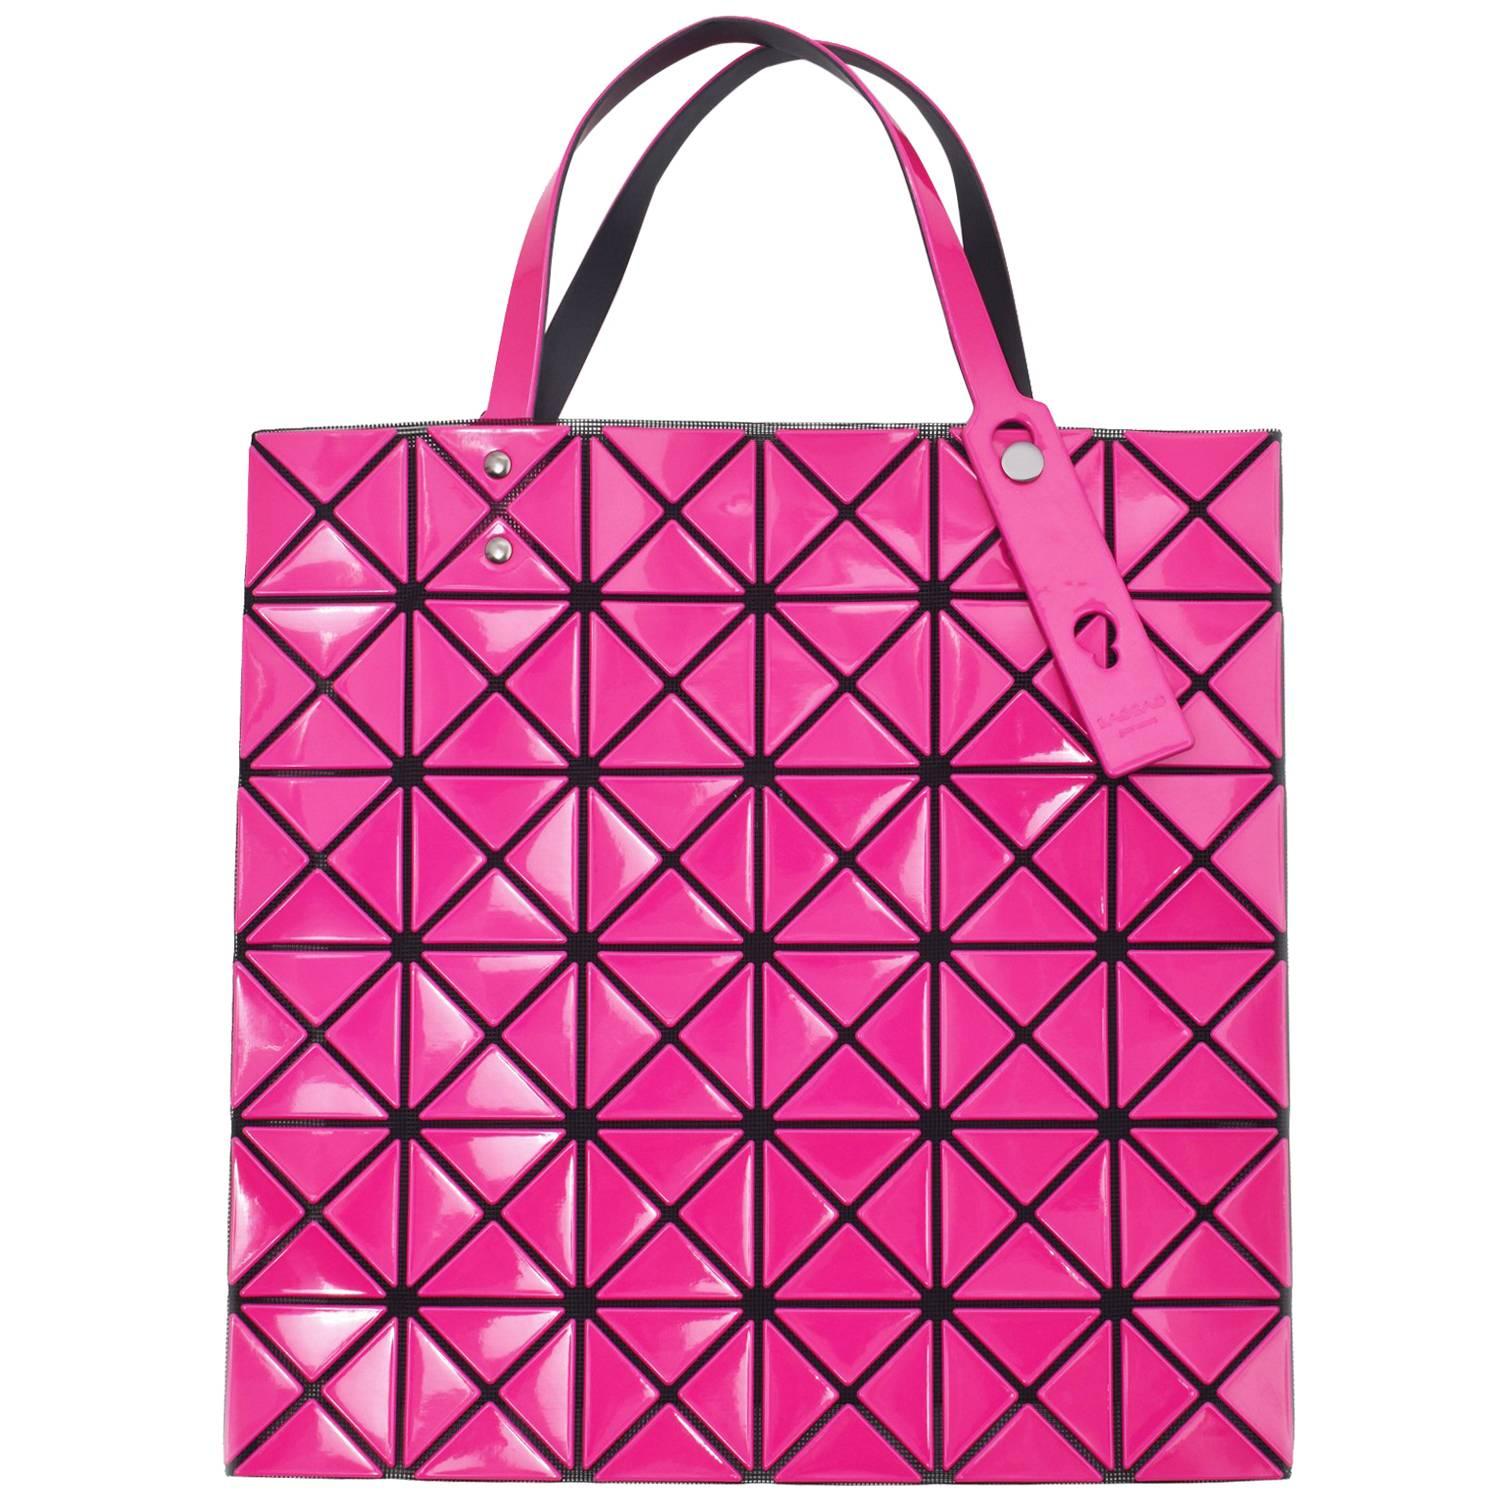 Issey Miyake Bao Bao Lucent Tote Bag For Sale